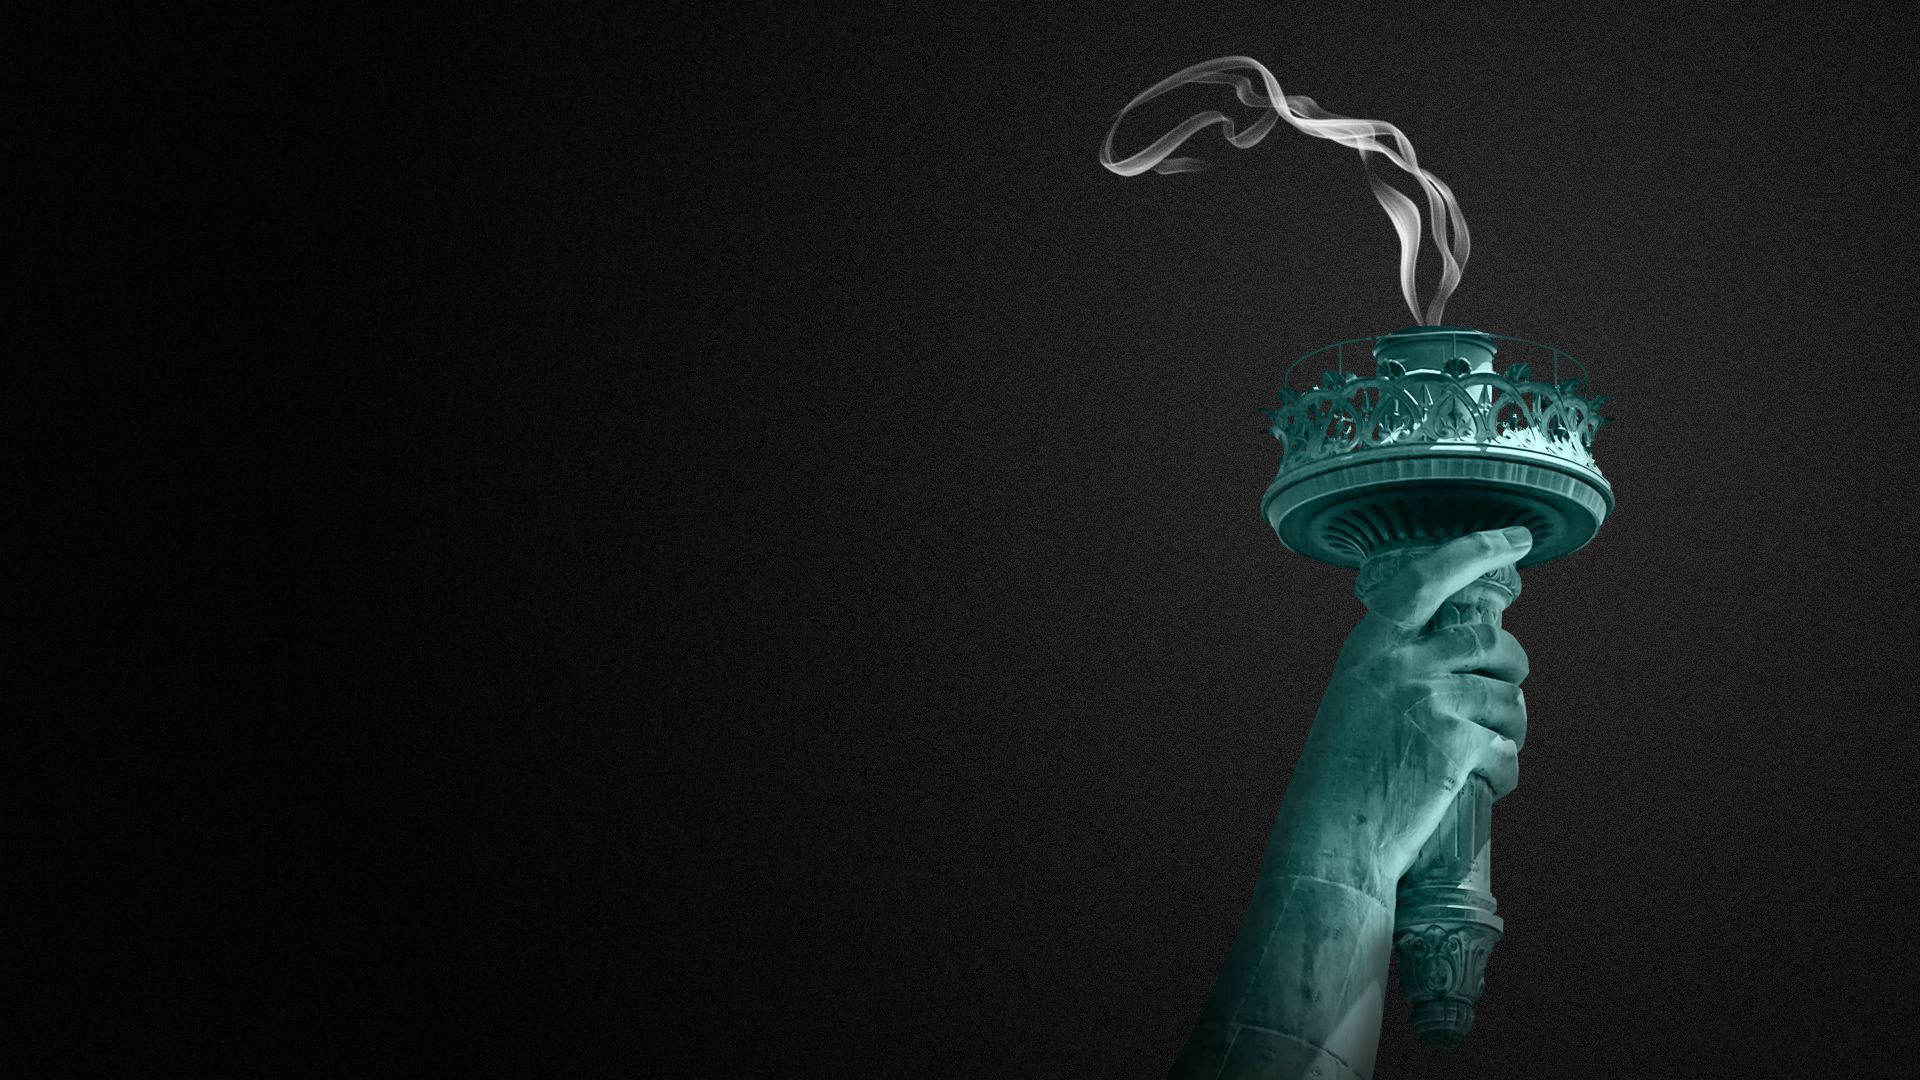 Illustration of the torch of the Statue of Liberty with a plume of smoke where the fire should be. 